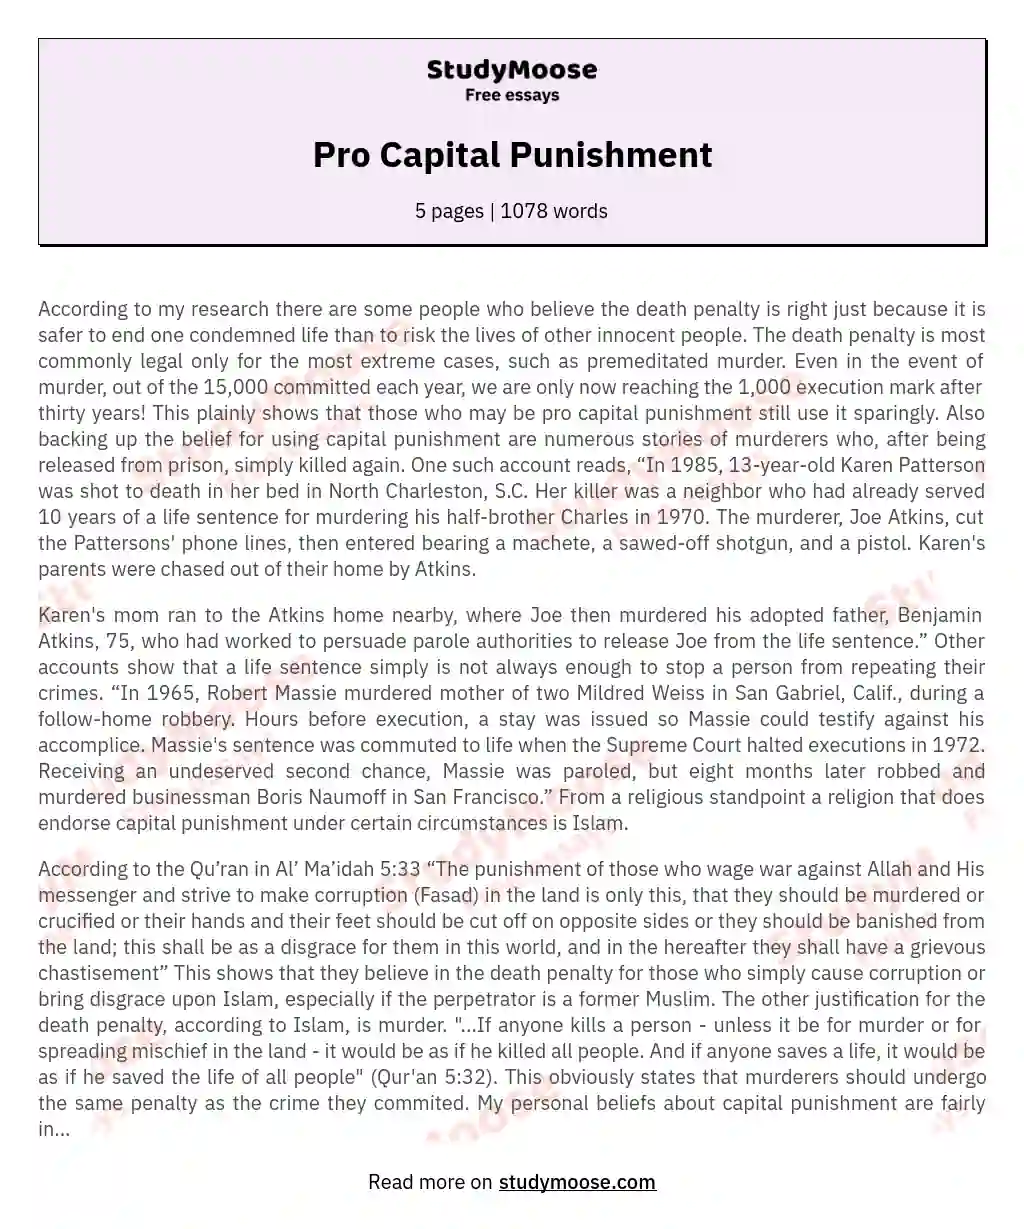 pros and cons of capital punishment essay